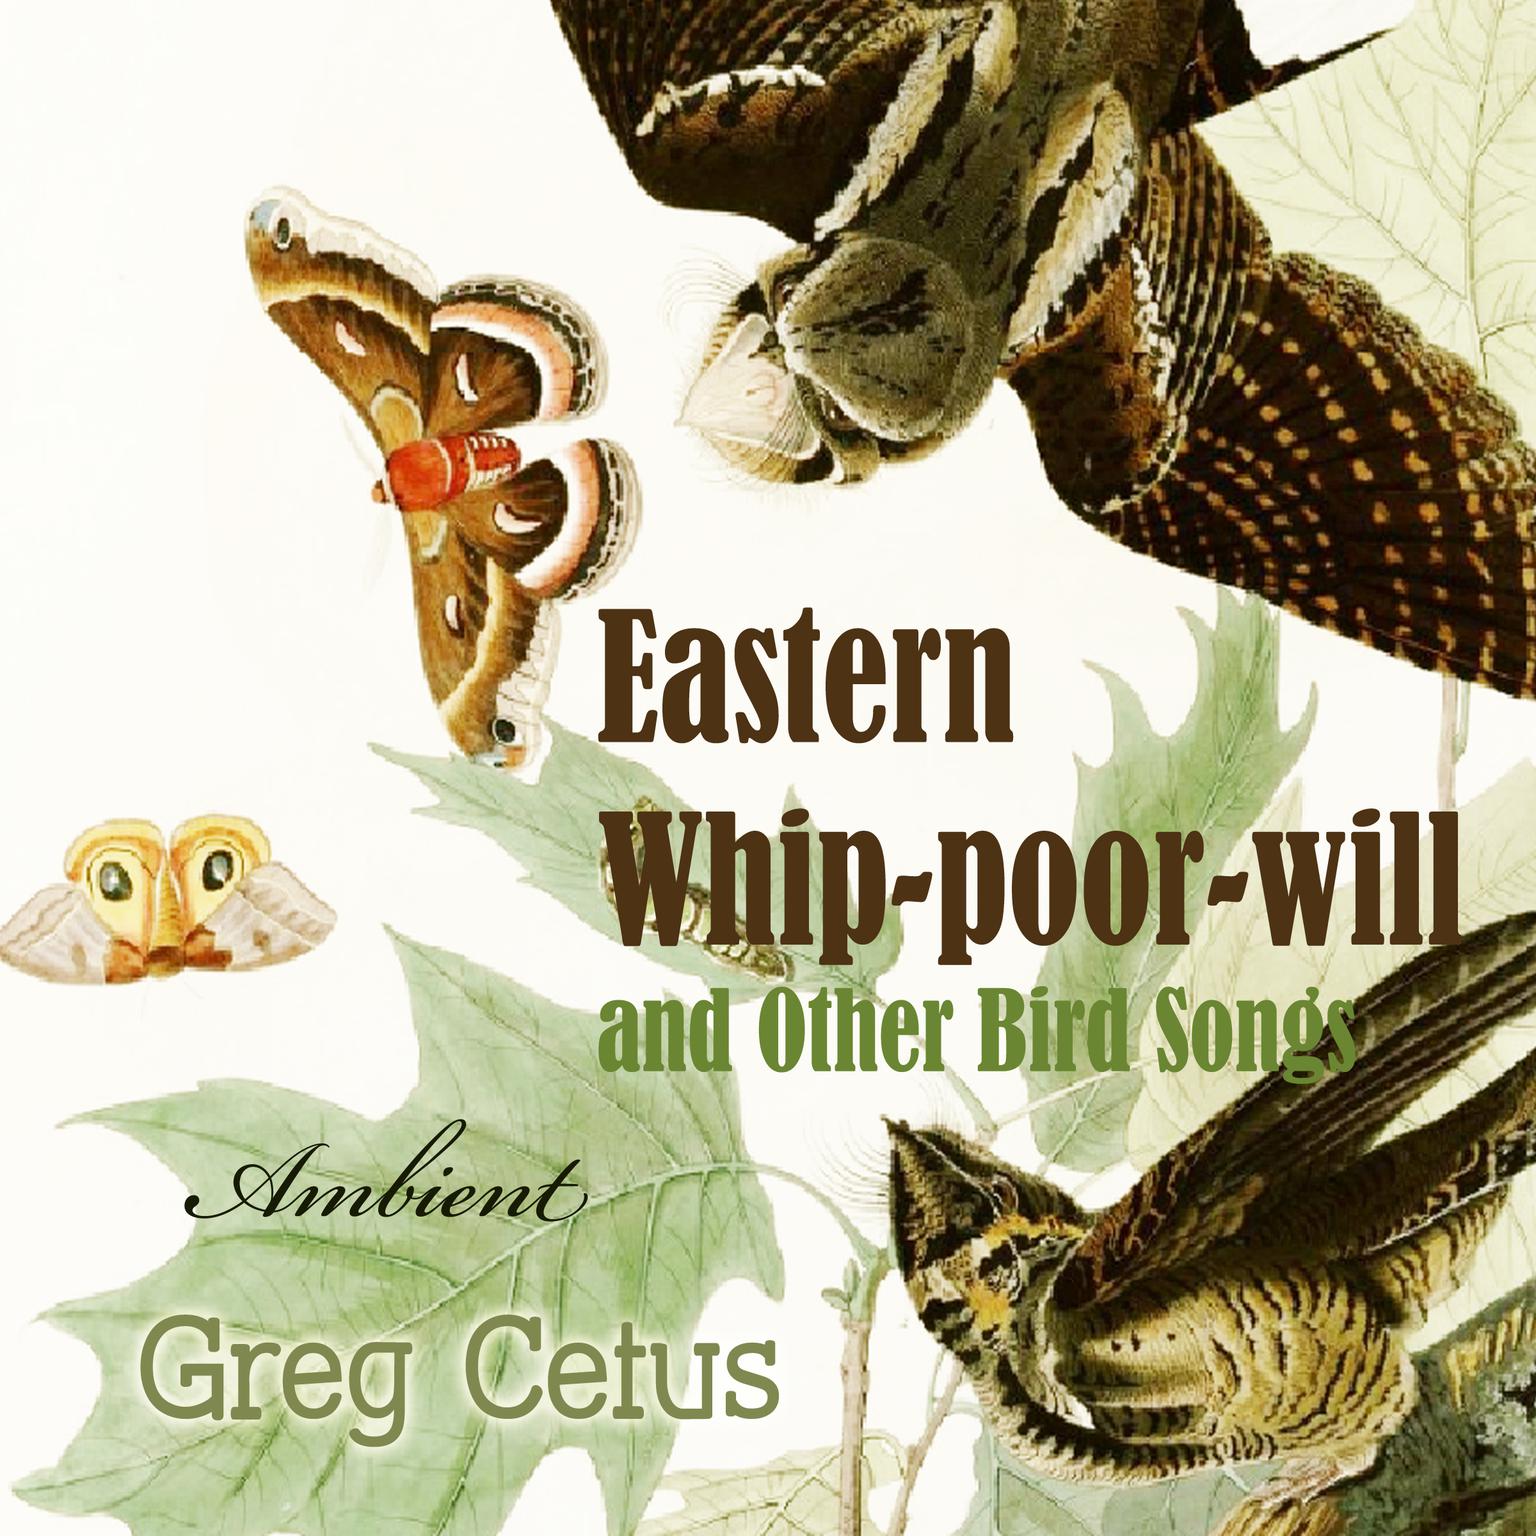 Eastern Whip-poor-will and Other Bird Songs: Nature Sounds for Trance and Meditation Audiobook, by Greg Cetus